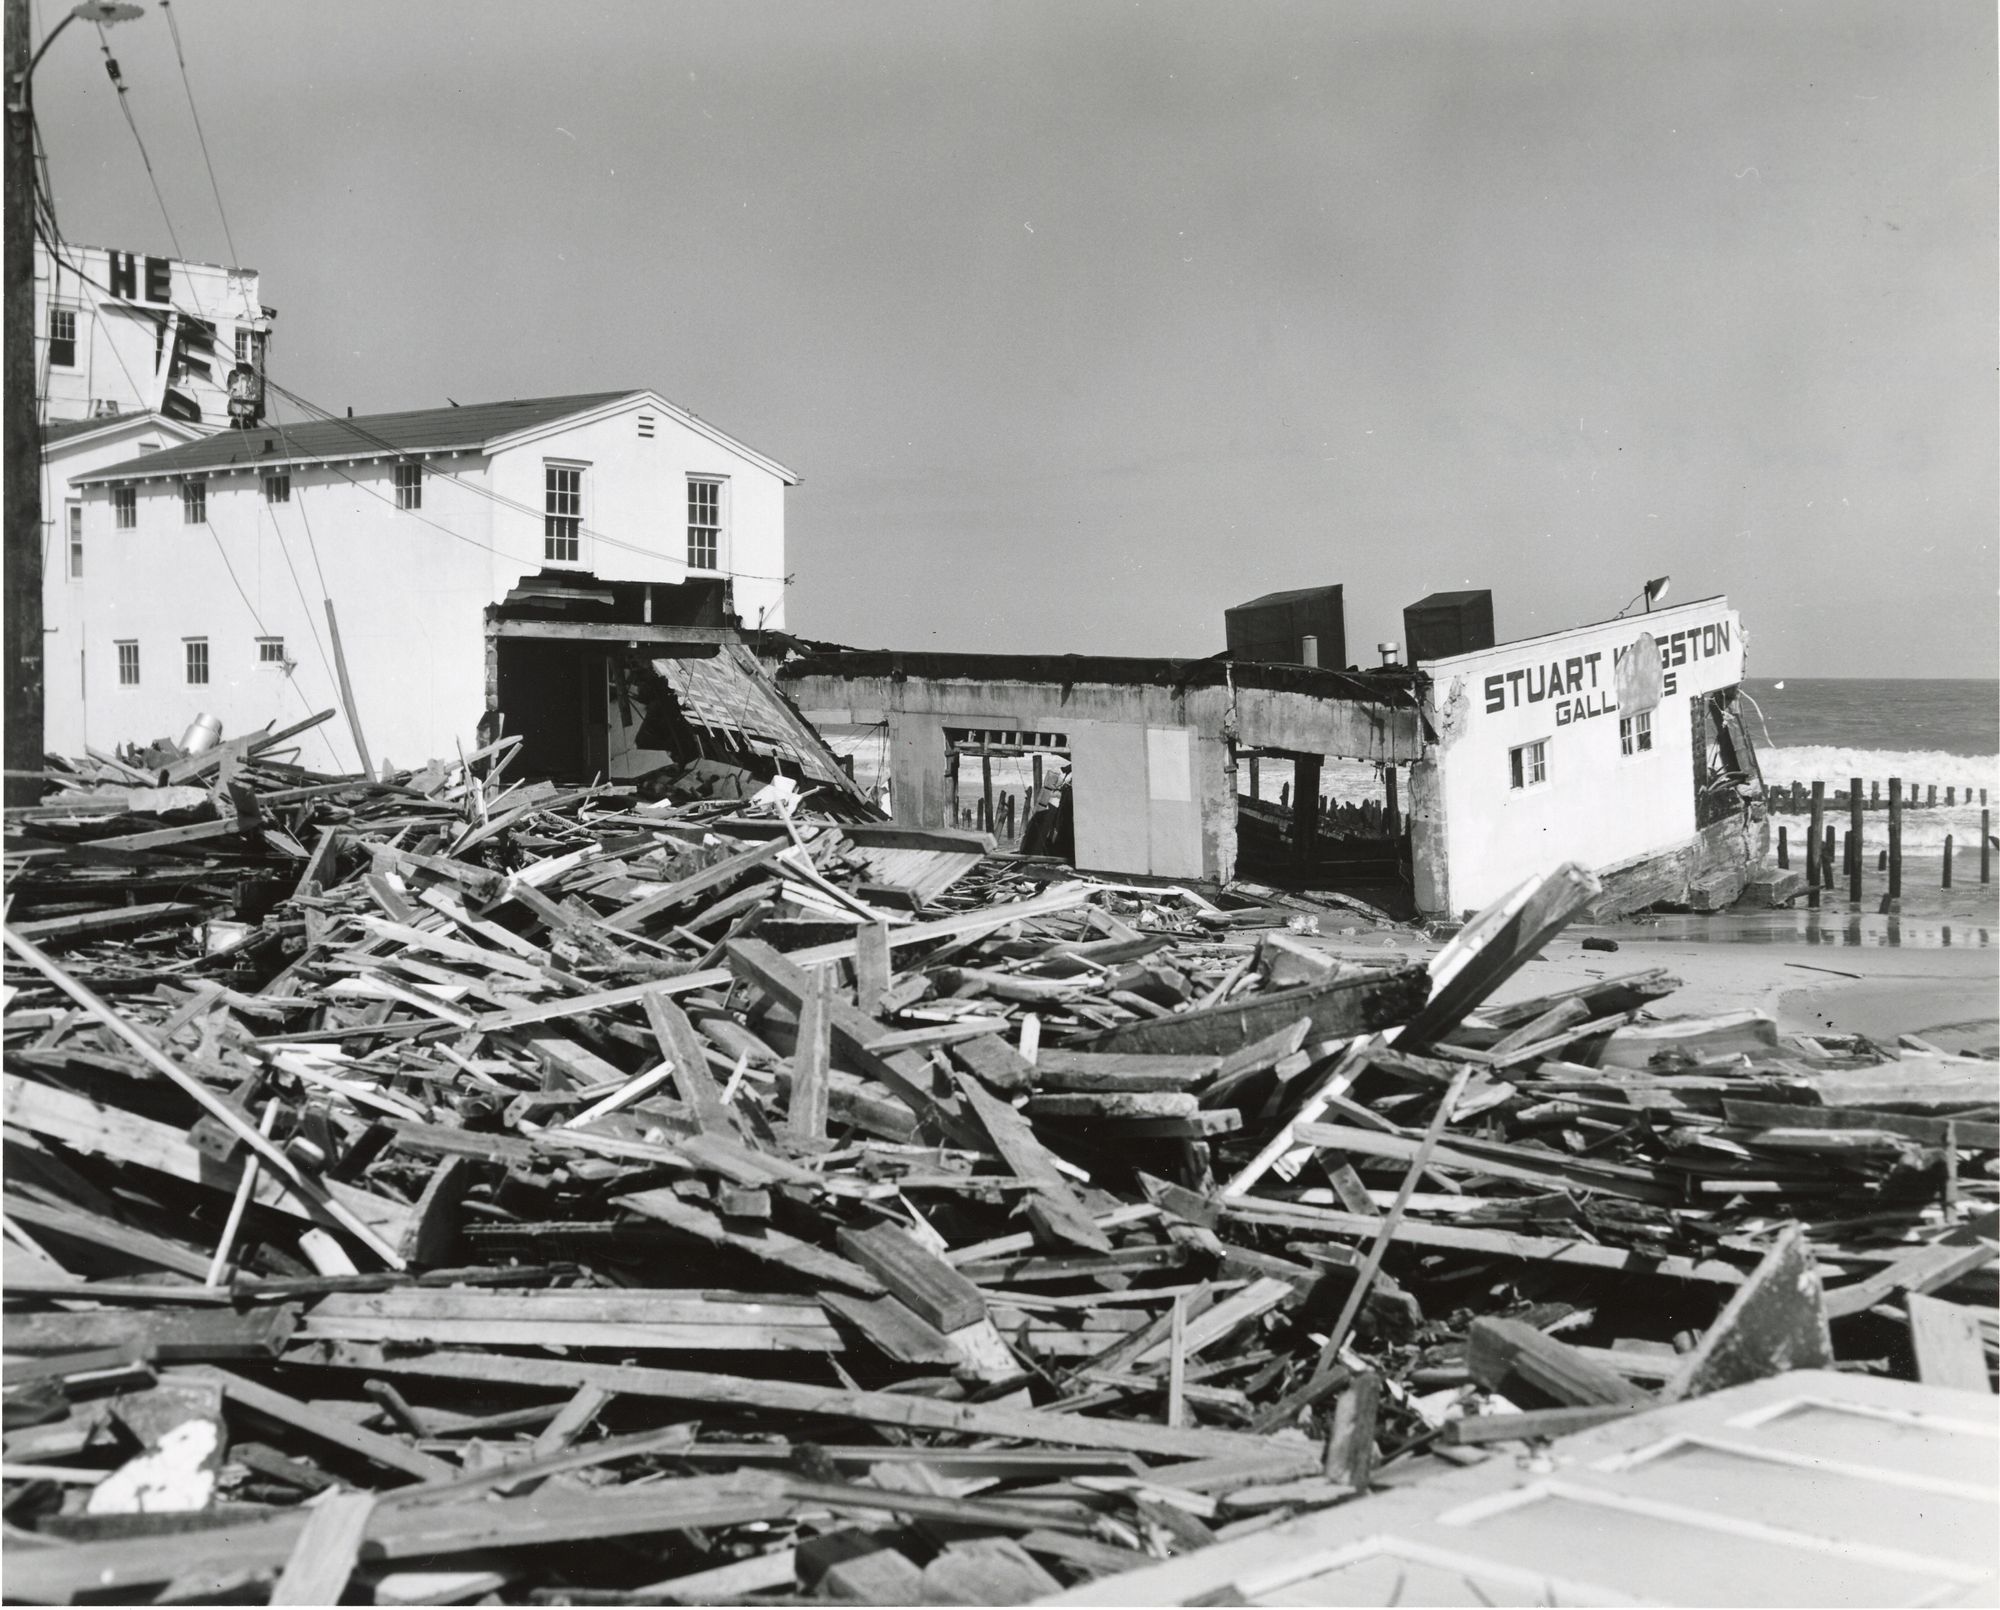 Stories and images capture the destruction of massive Storm of '62